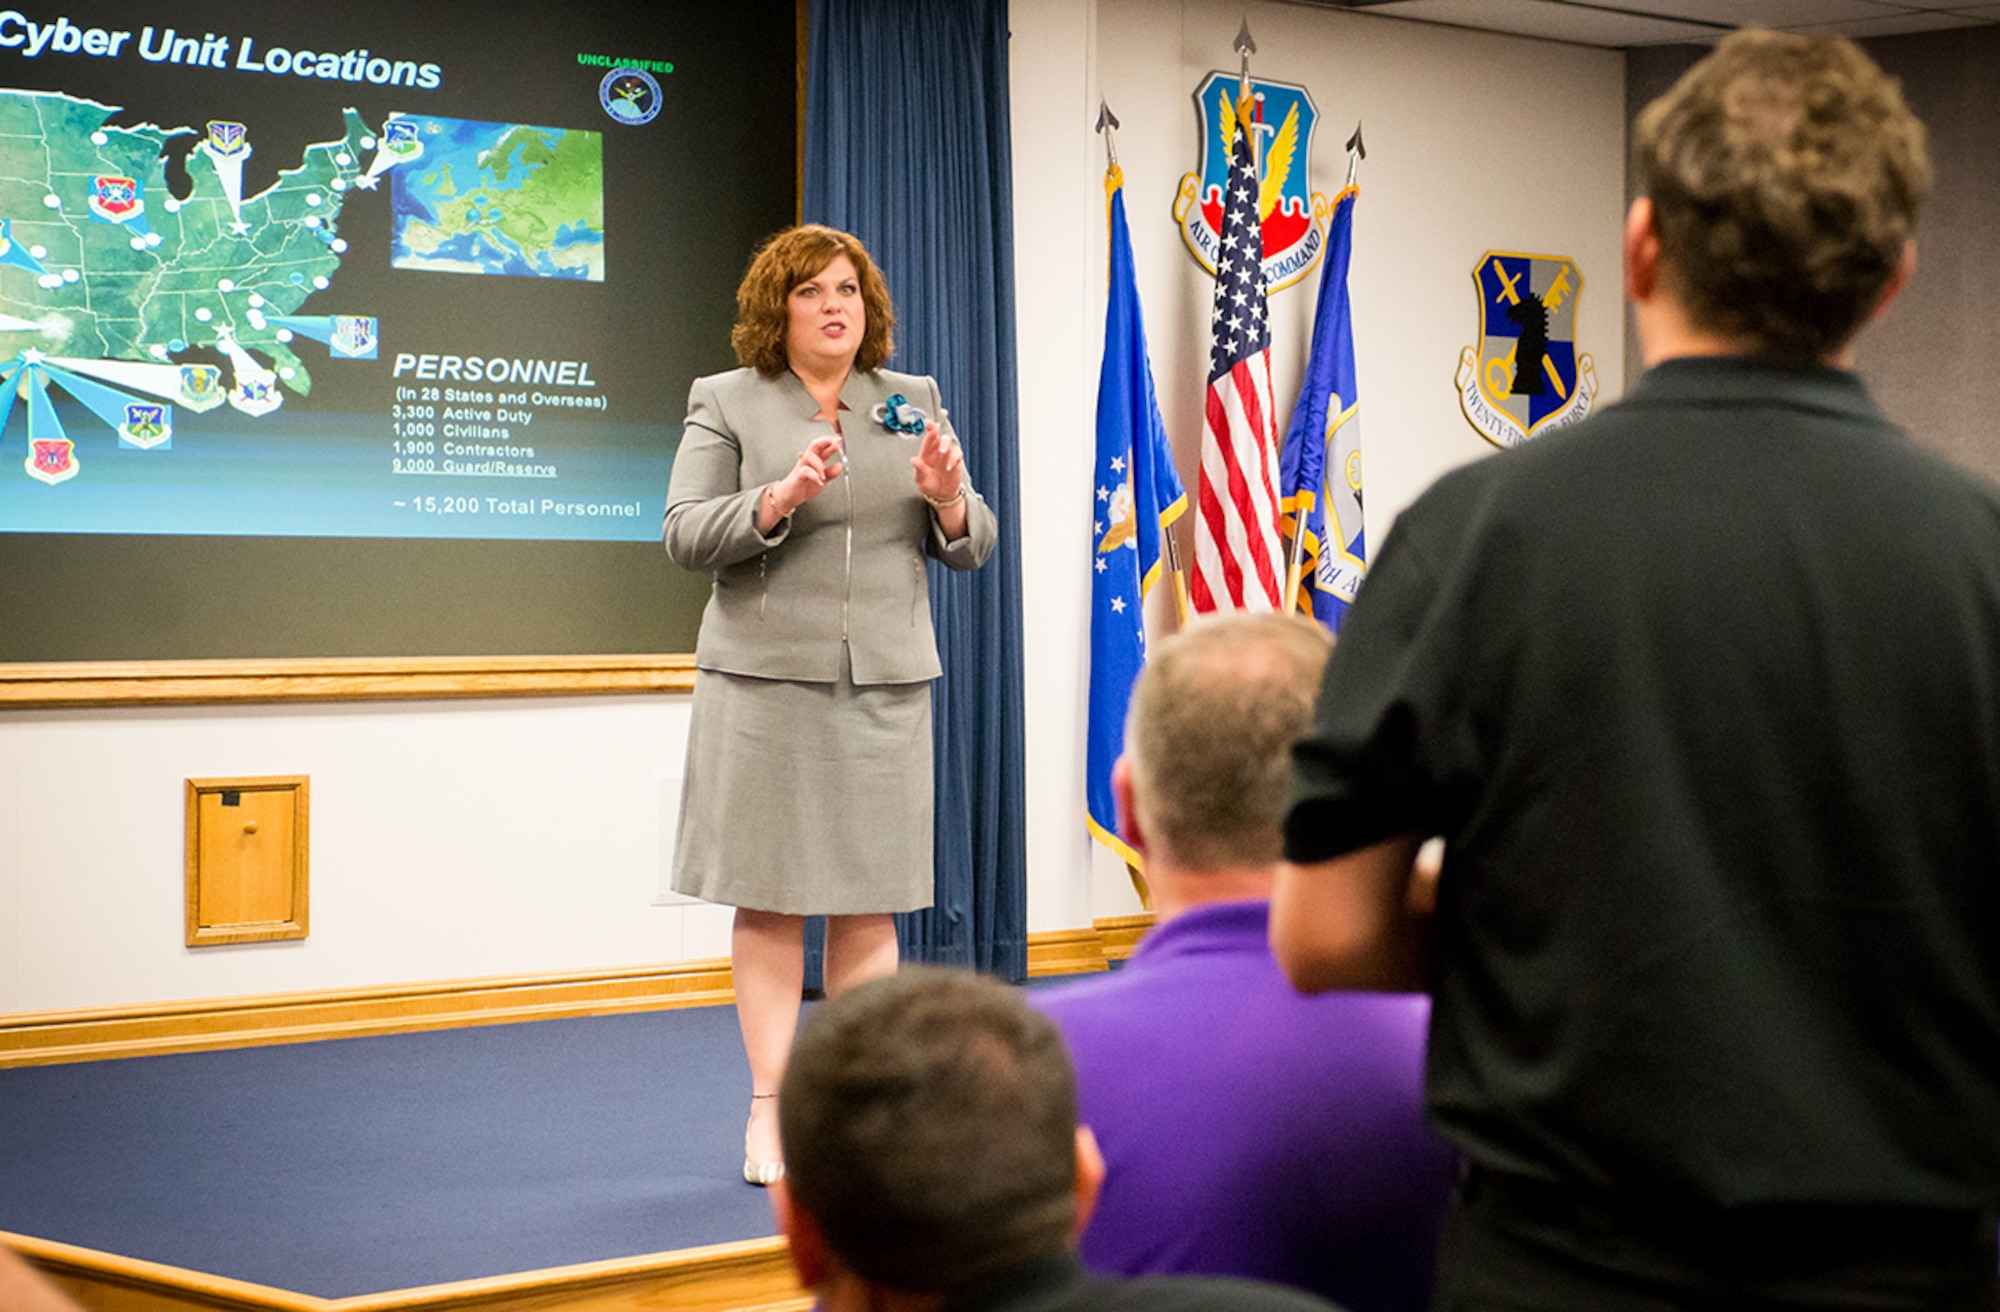 Sherri Hanson, executive director, 24th Air Force, speaks to Department of Defense's 2017 Executive Leadership Development Program participants at 25th Air Force Headquarters at Joint Base San Antonio-Lackland, Texas May 9. (U.S. Air Force Photo by Sharon Singleton)